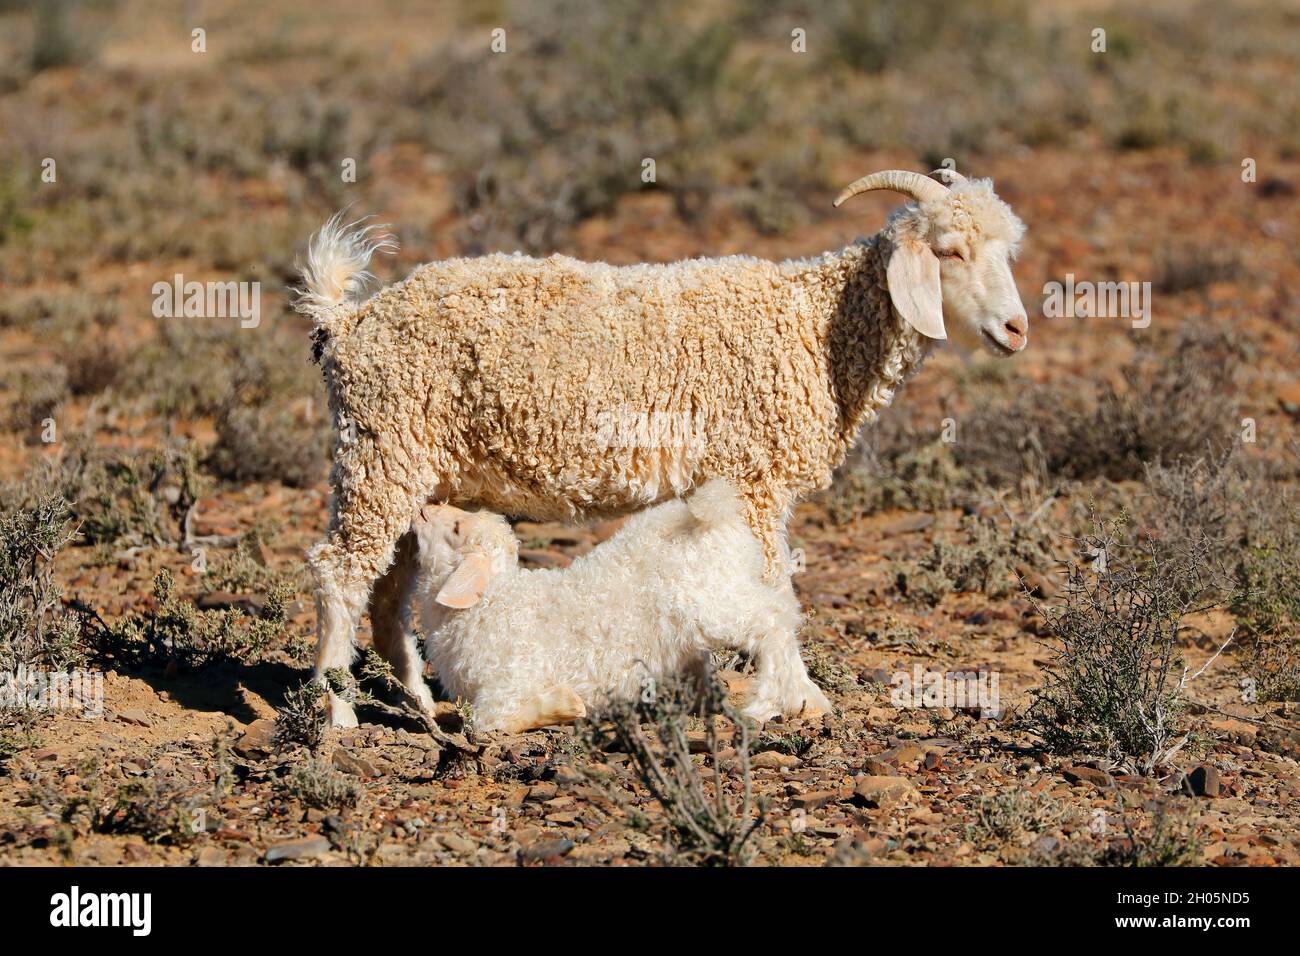 A young angora goat kid suckling milk from its mother on a rural farm, South Africa Stock Photo